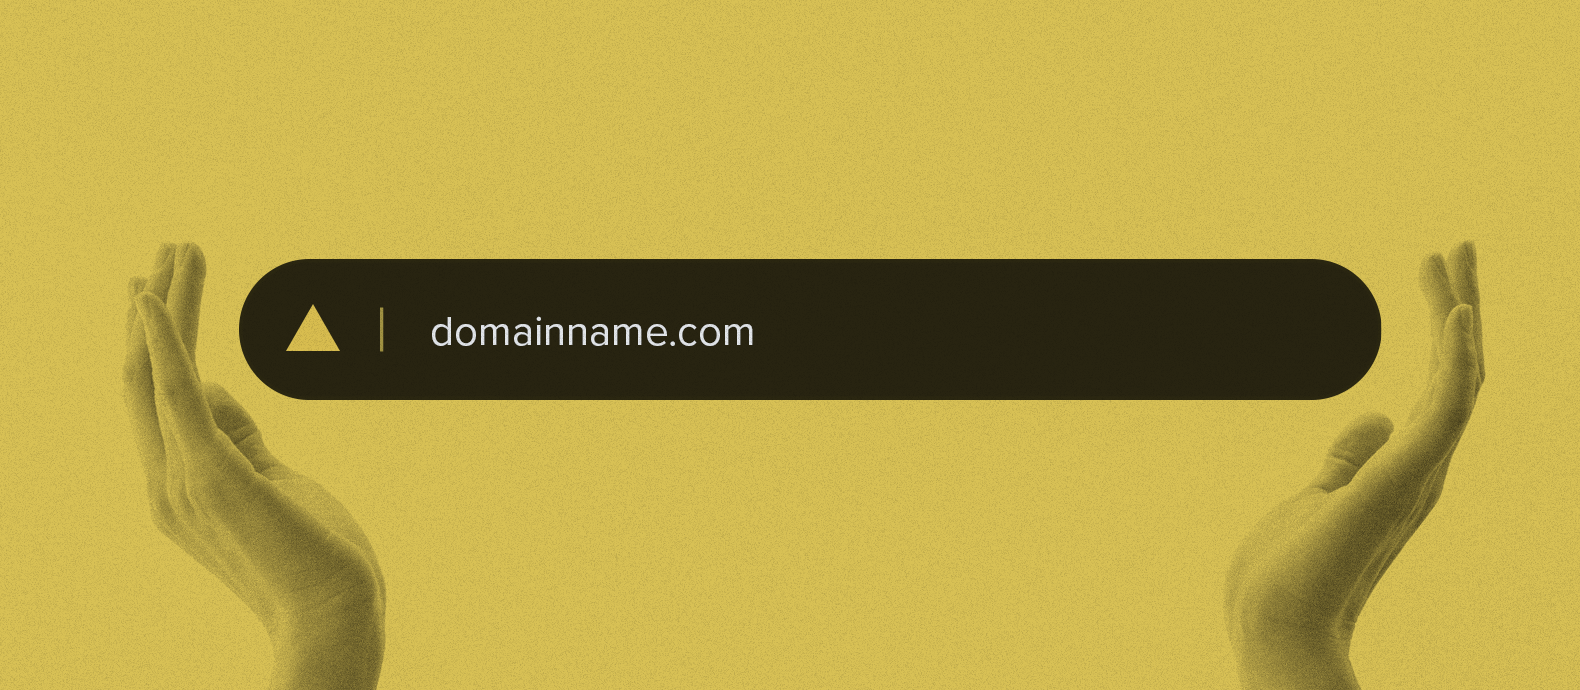 How to trademark a domain name - Red Points